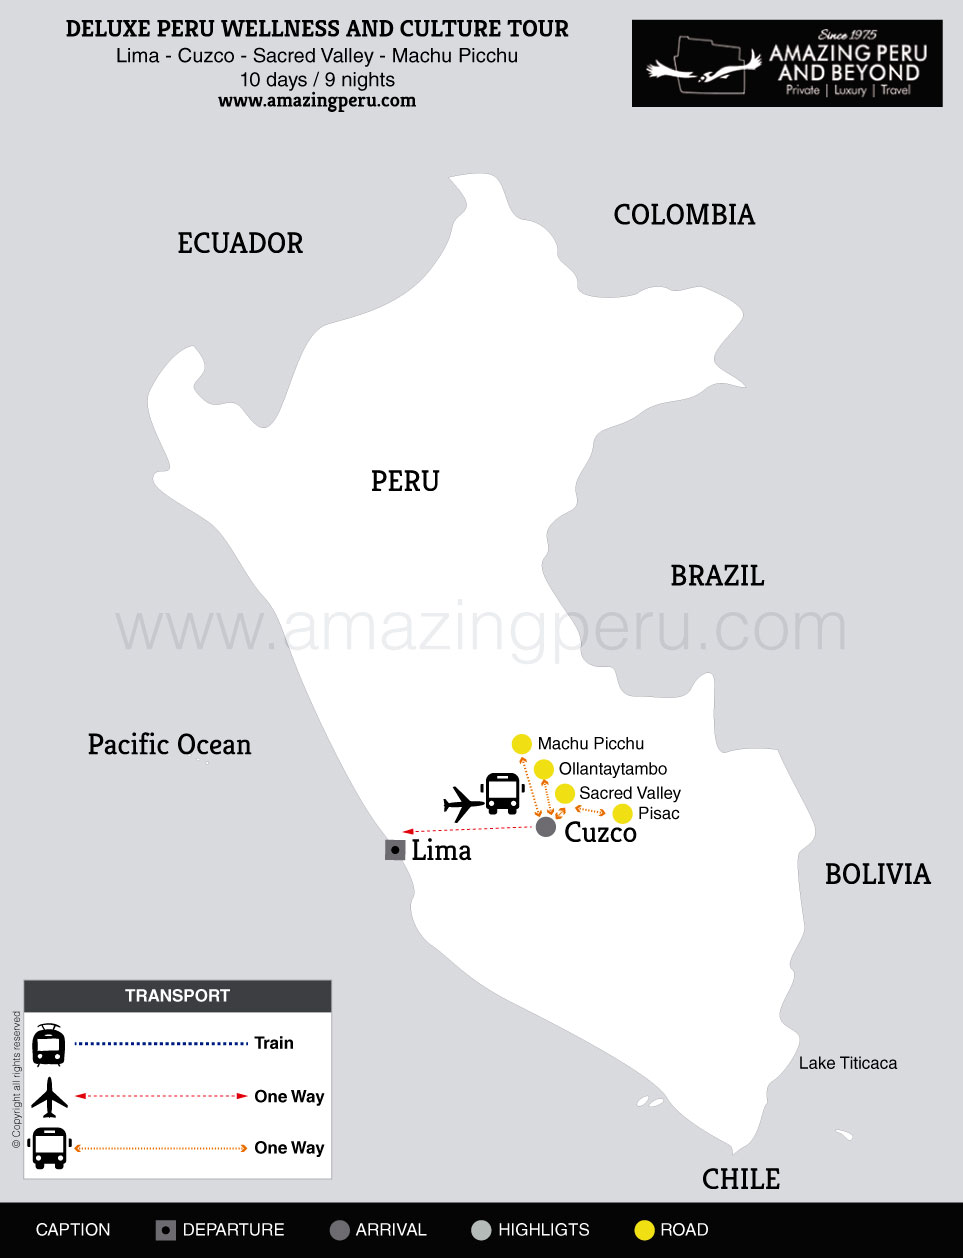 2024 Deluxe Peru Wellness and Culture Tour - 10 days / 9 nights.